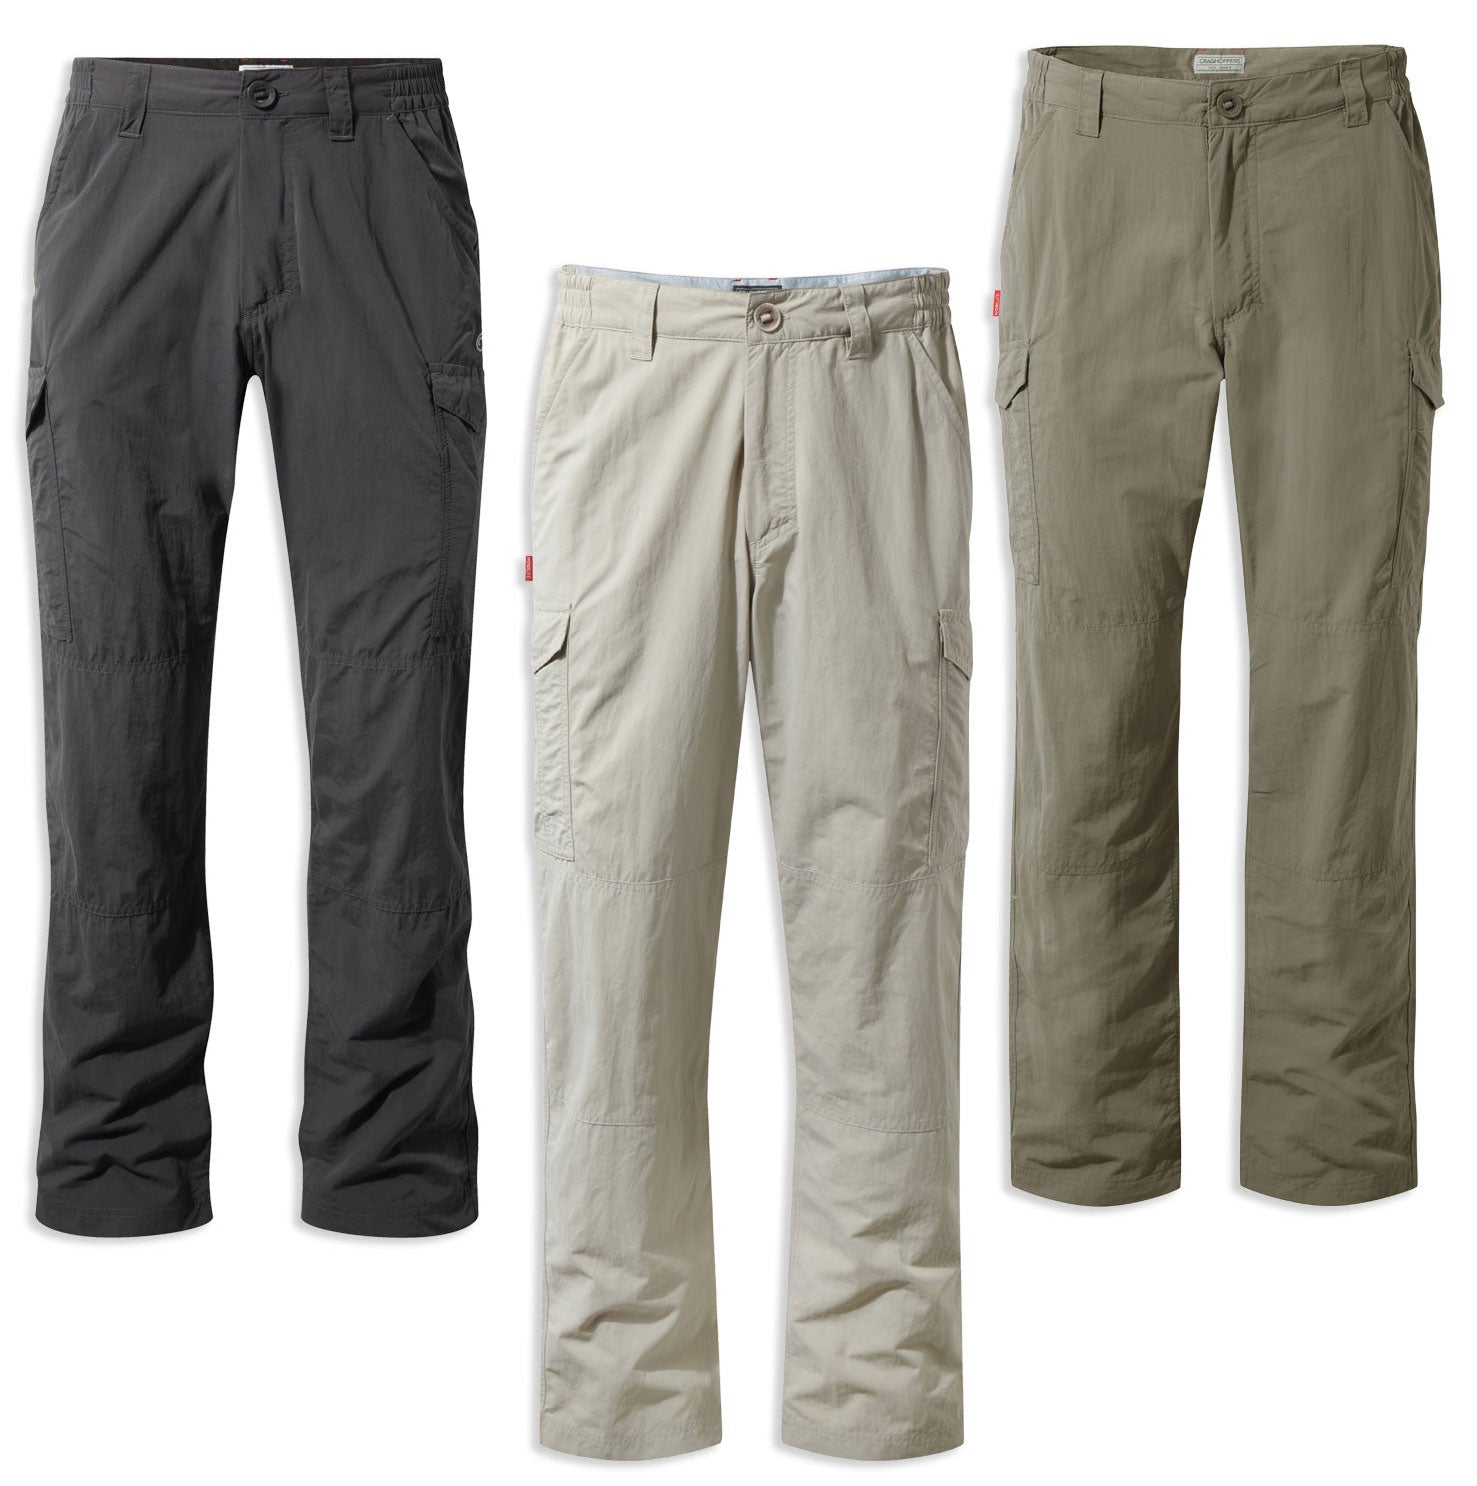 Craghoppers NosiLife Cargo II Trousers in three colours